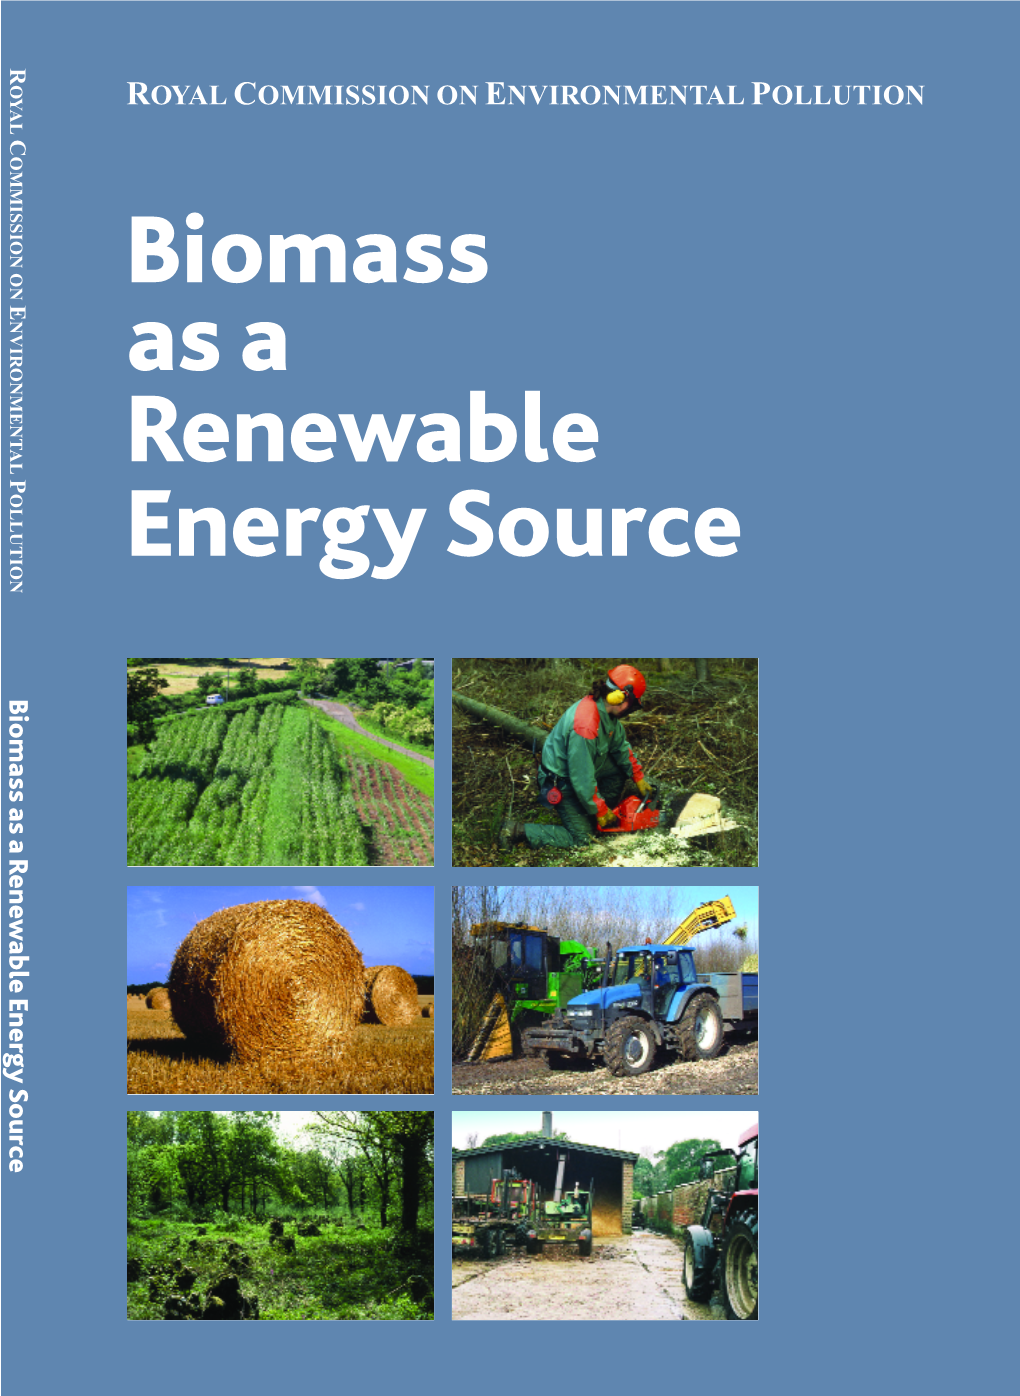 Why Biomass? 1.4 Wood Is a Renewable Fuel; Its Production and Use Is Almost Carbon Neutral